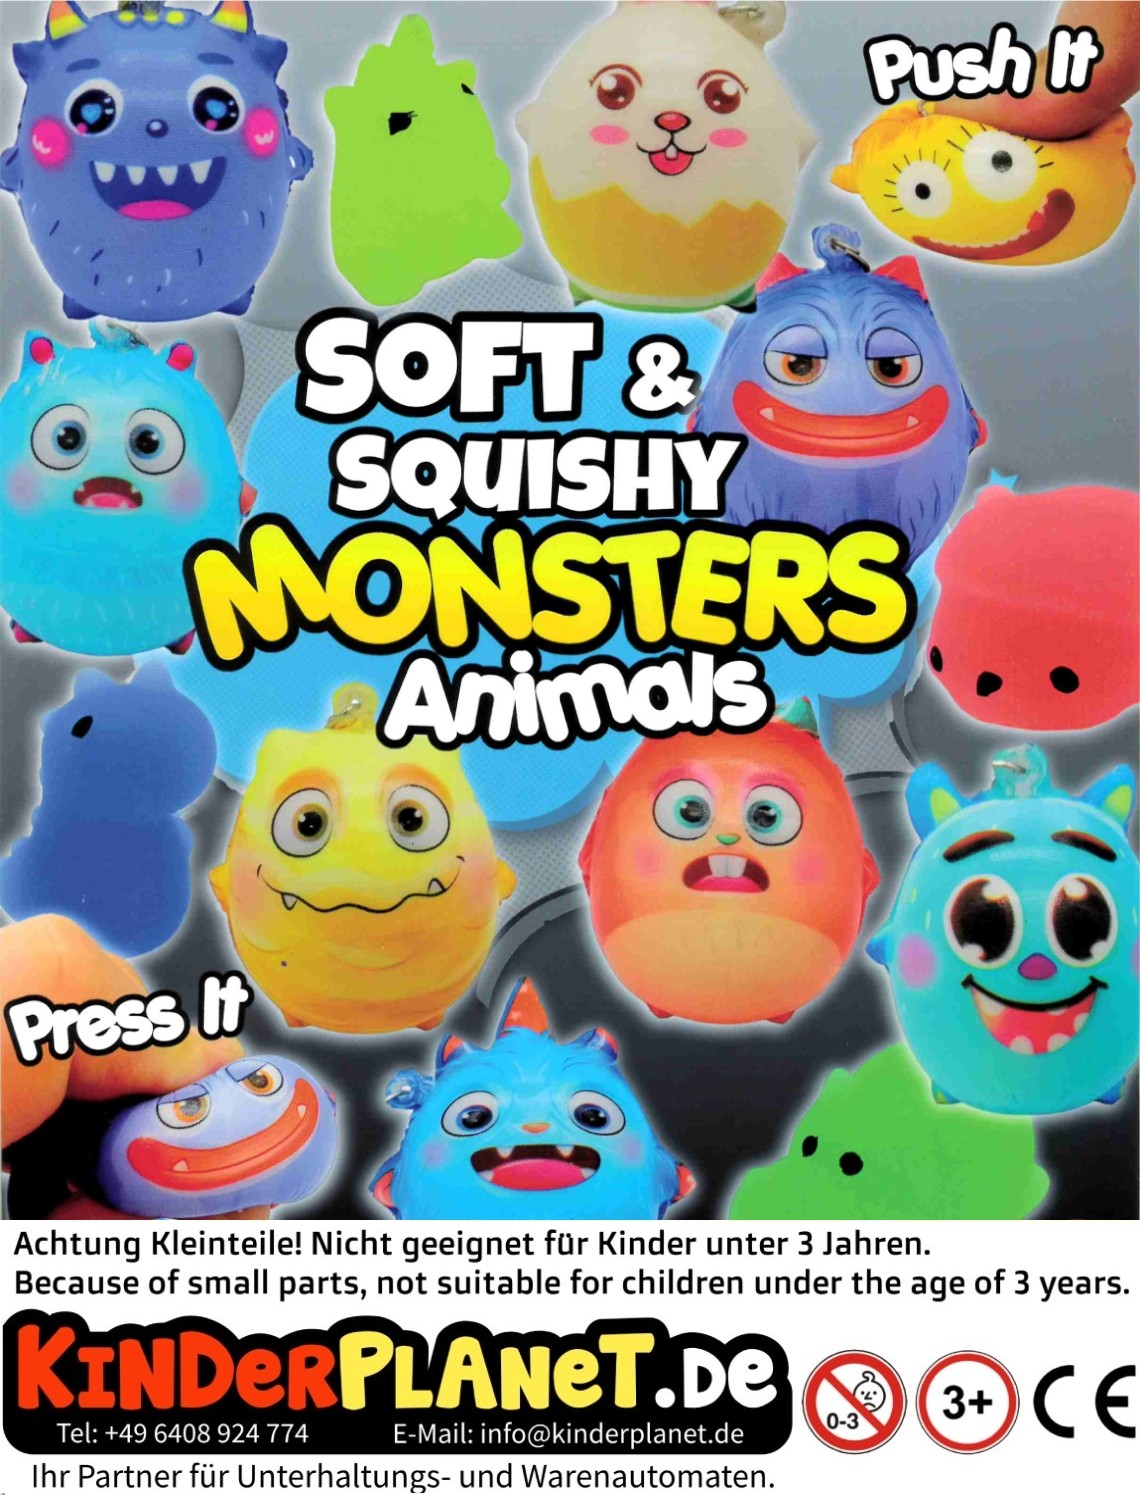 Soft & Squishy Monsters Animals - in 55mm Kapsel